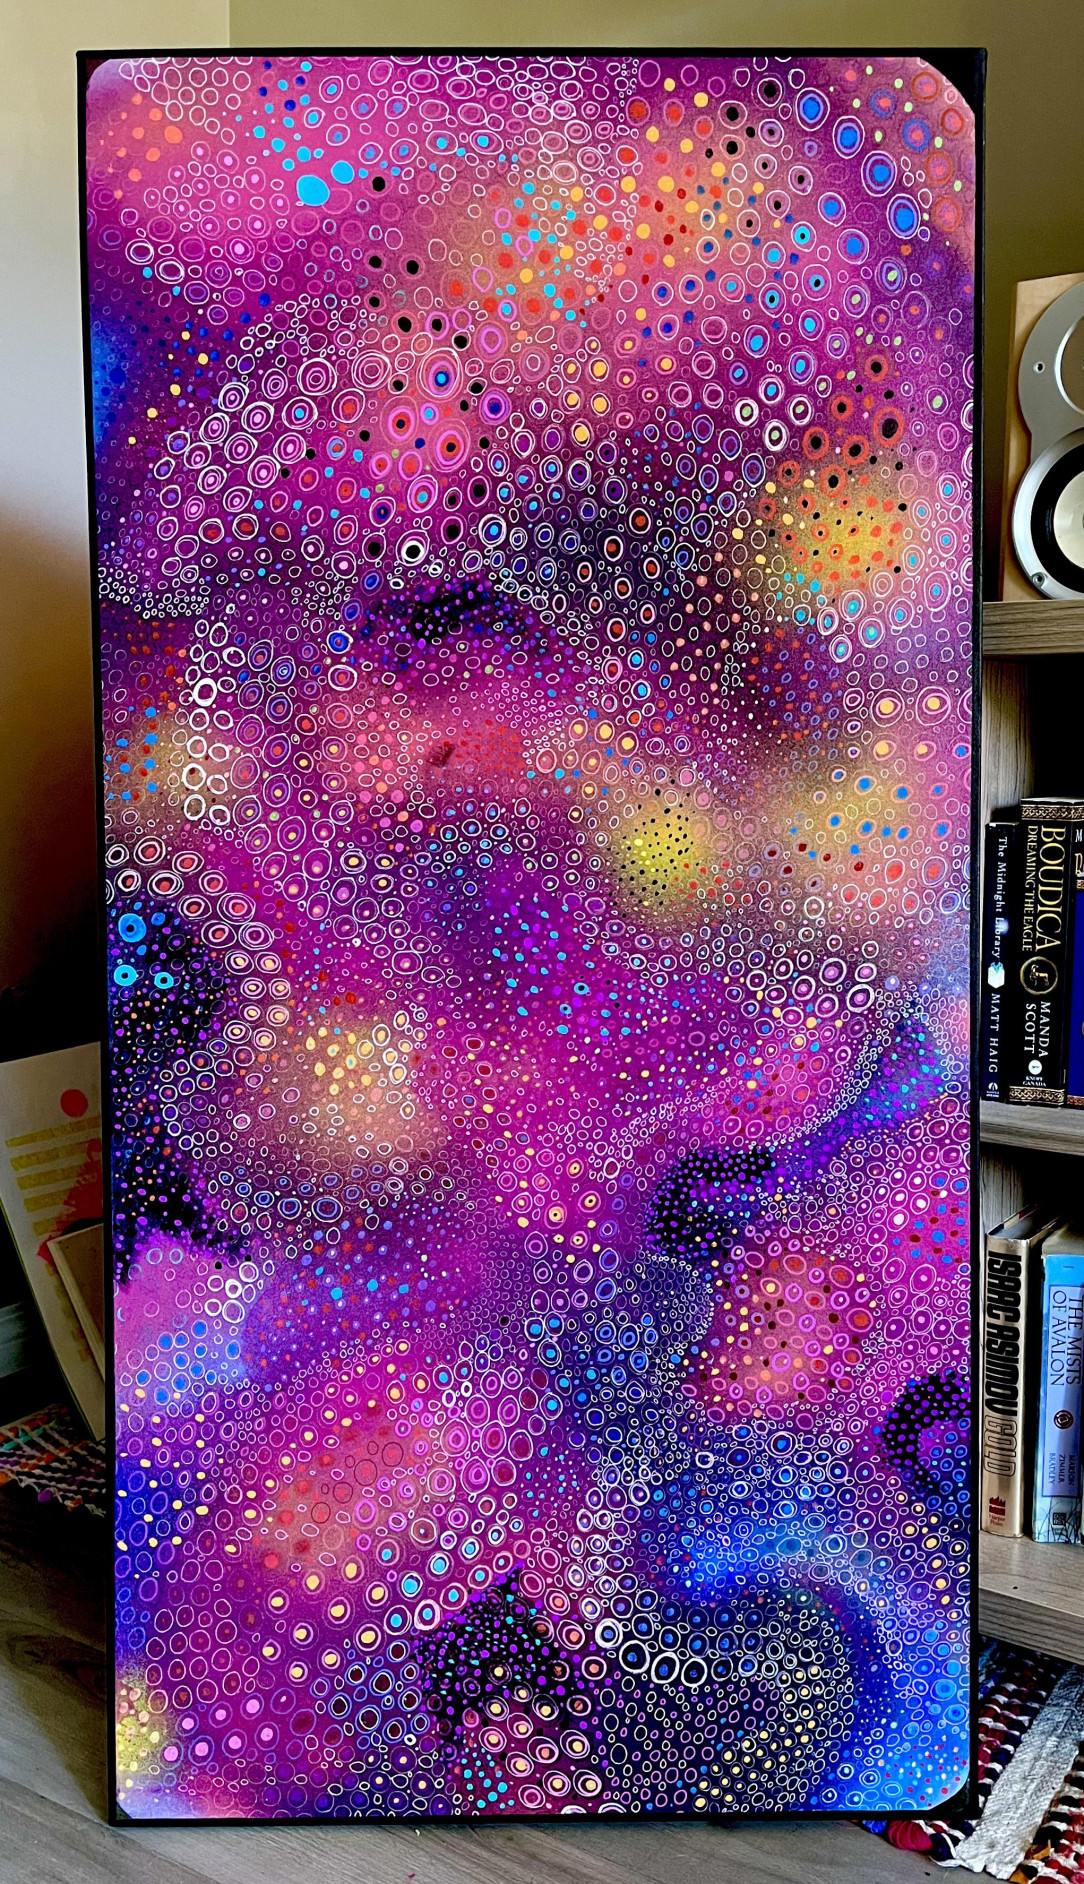 Galaxy Dive, ink and acrylic